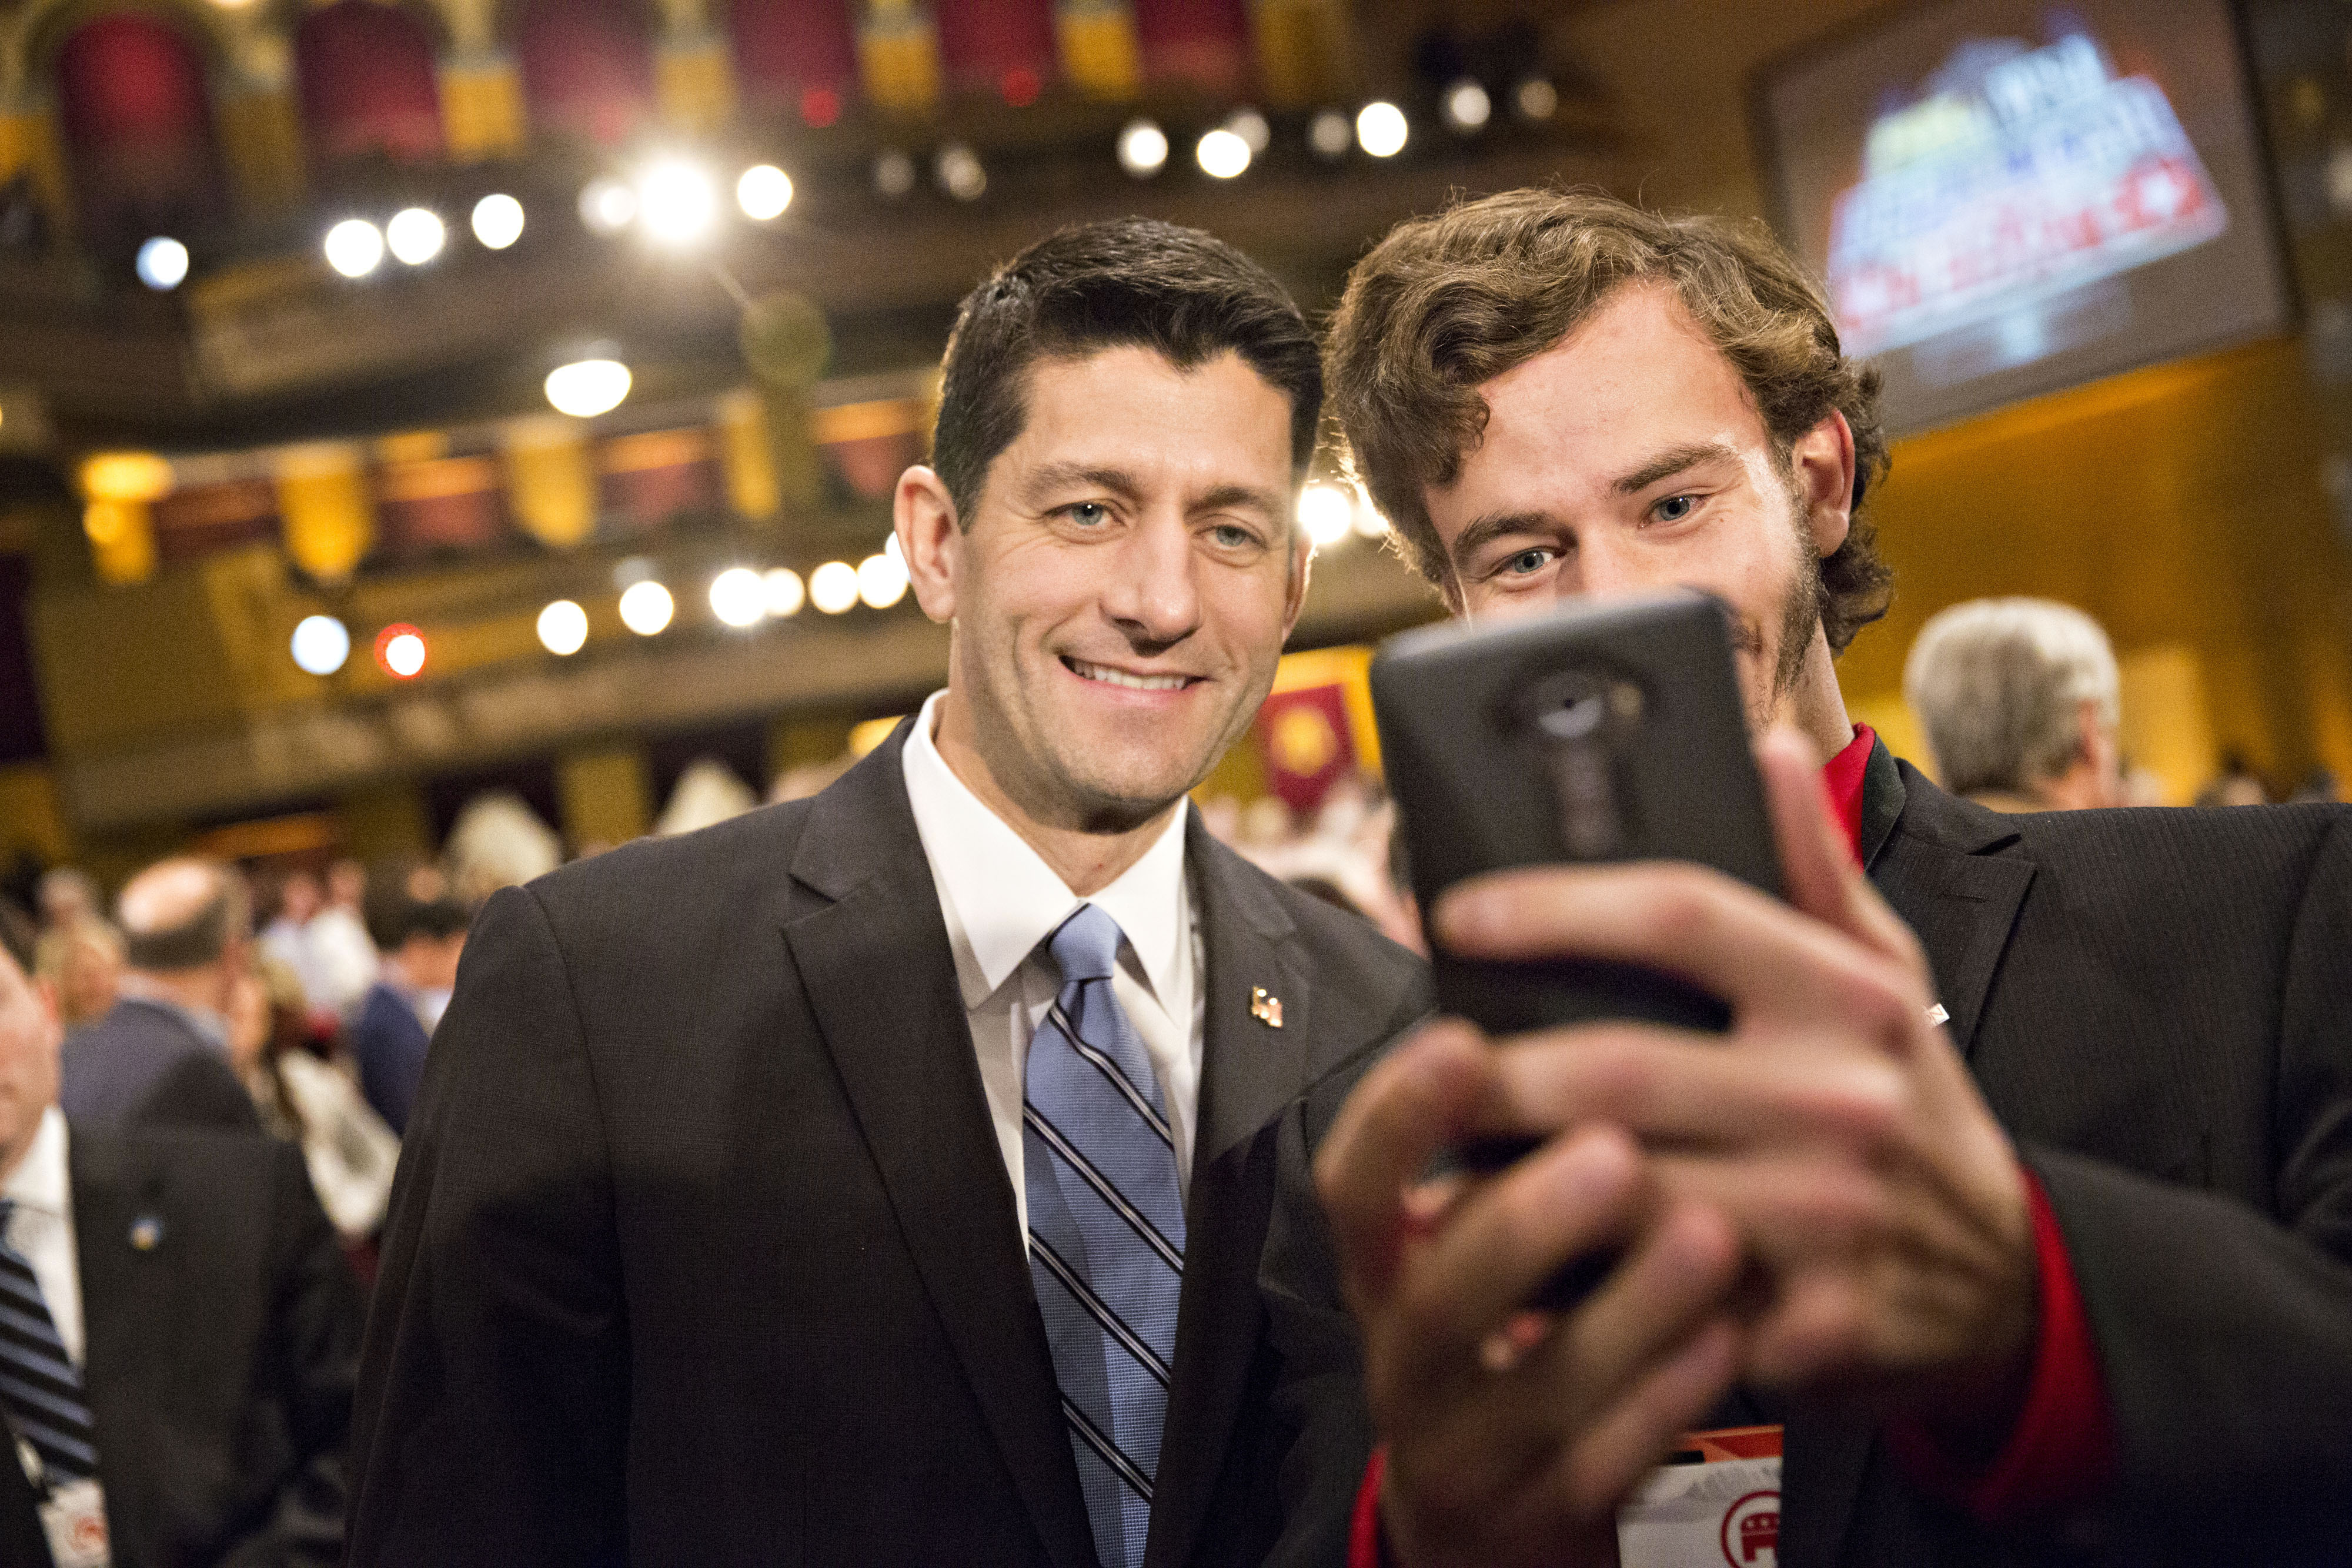 U.S. House Speaker Paul Ryan taking a similarly diverse selfie during a presidential candidate debate in Milwaukee, Wisconsin, on Nov. 10, 2015. (Bloomberg/Getty Images)